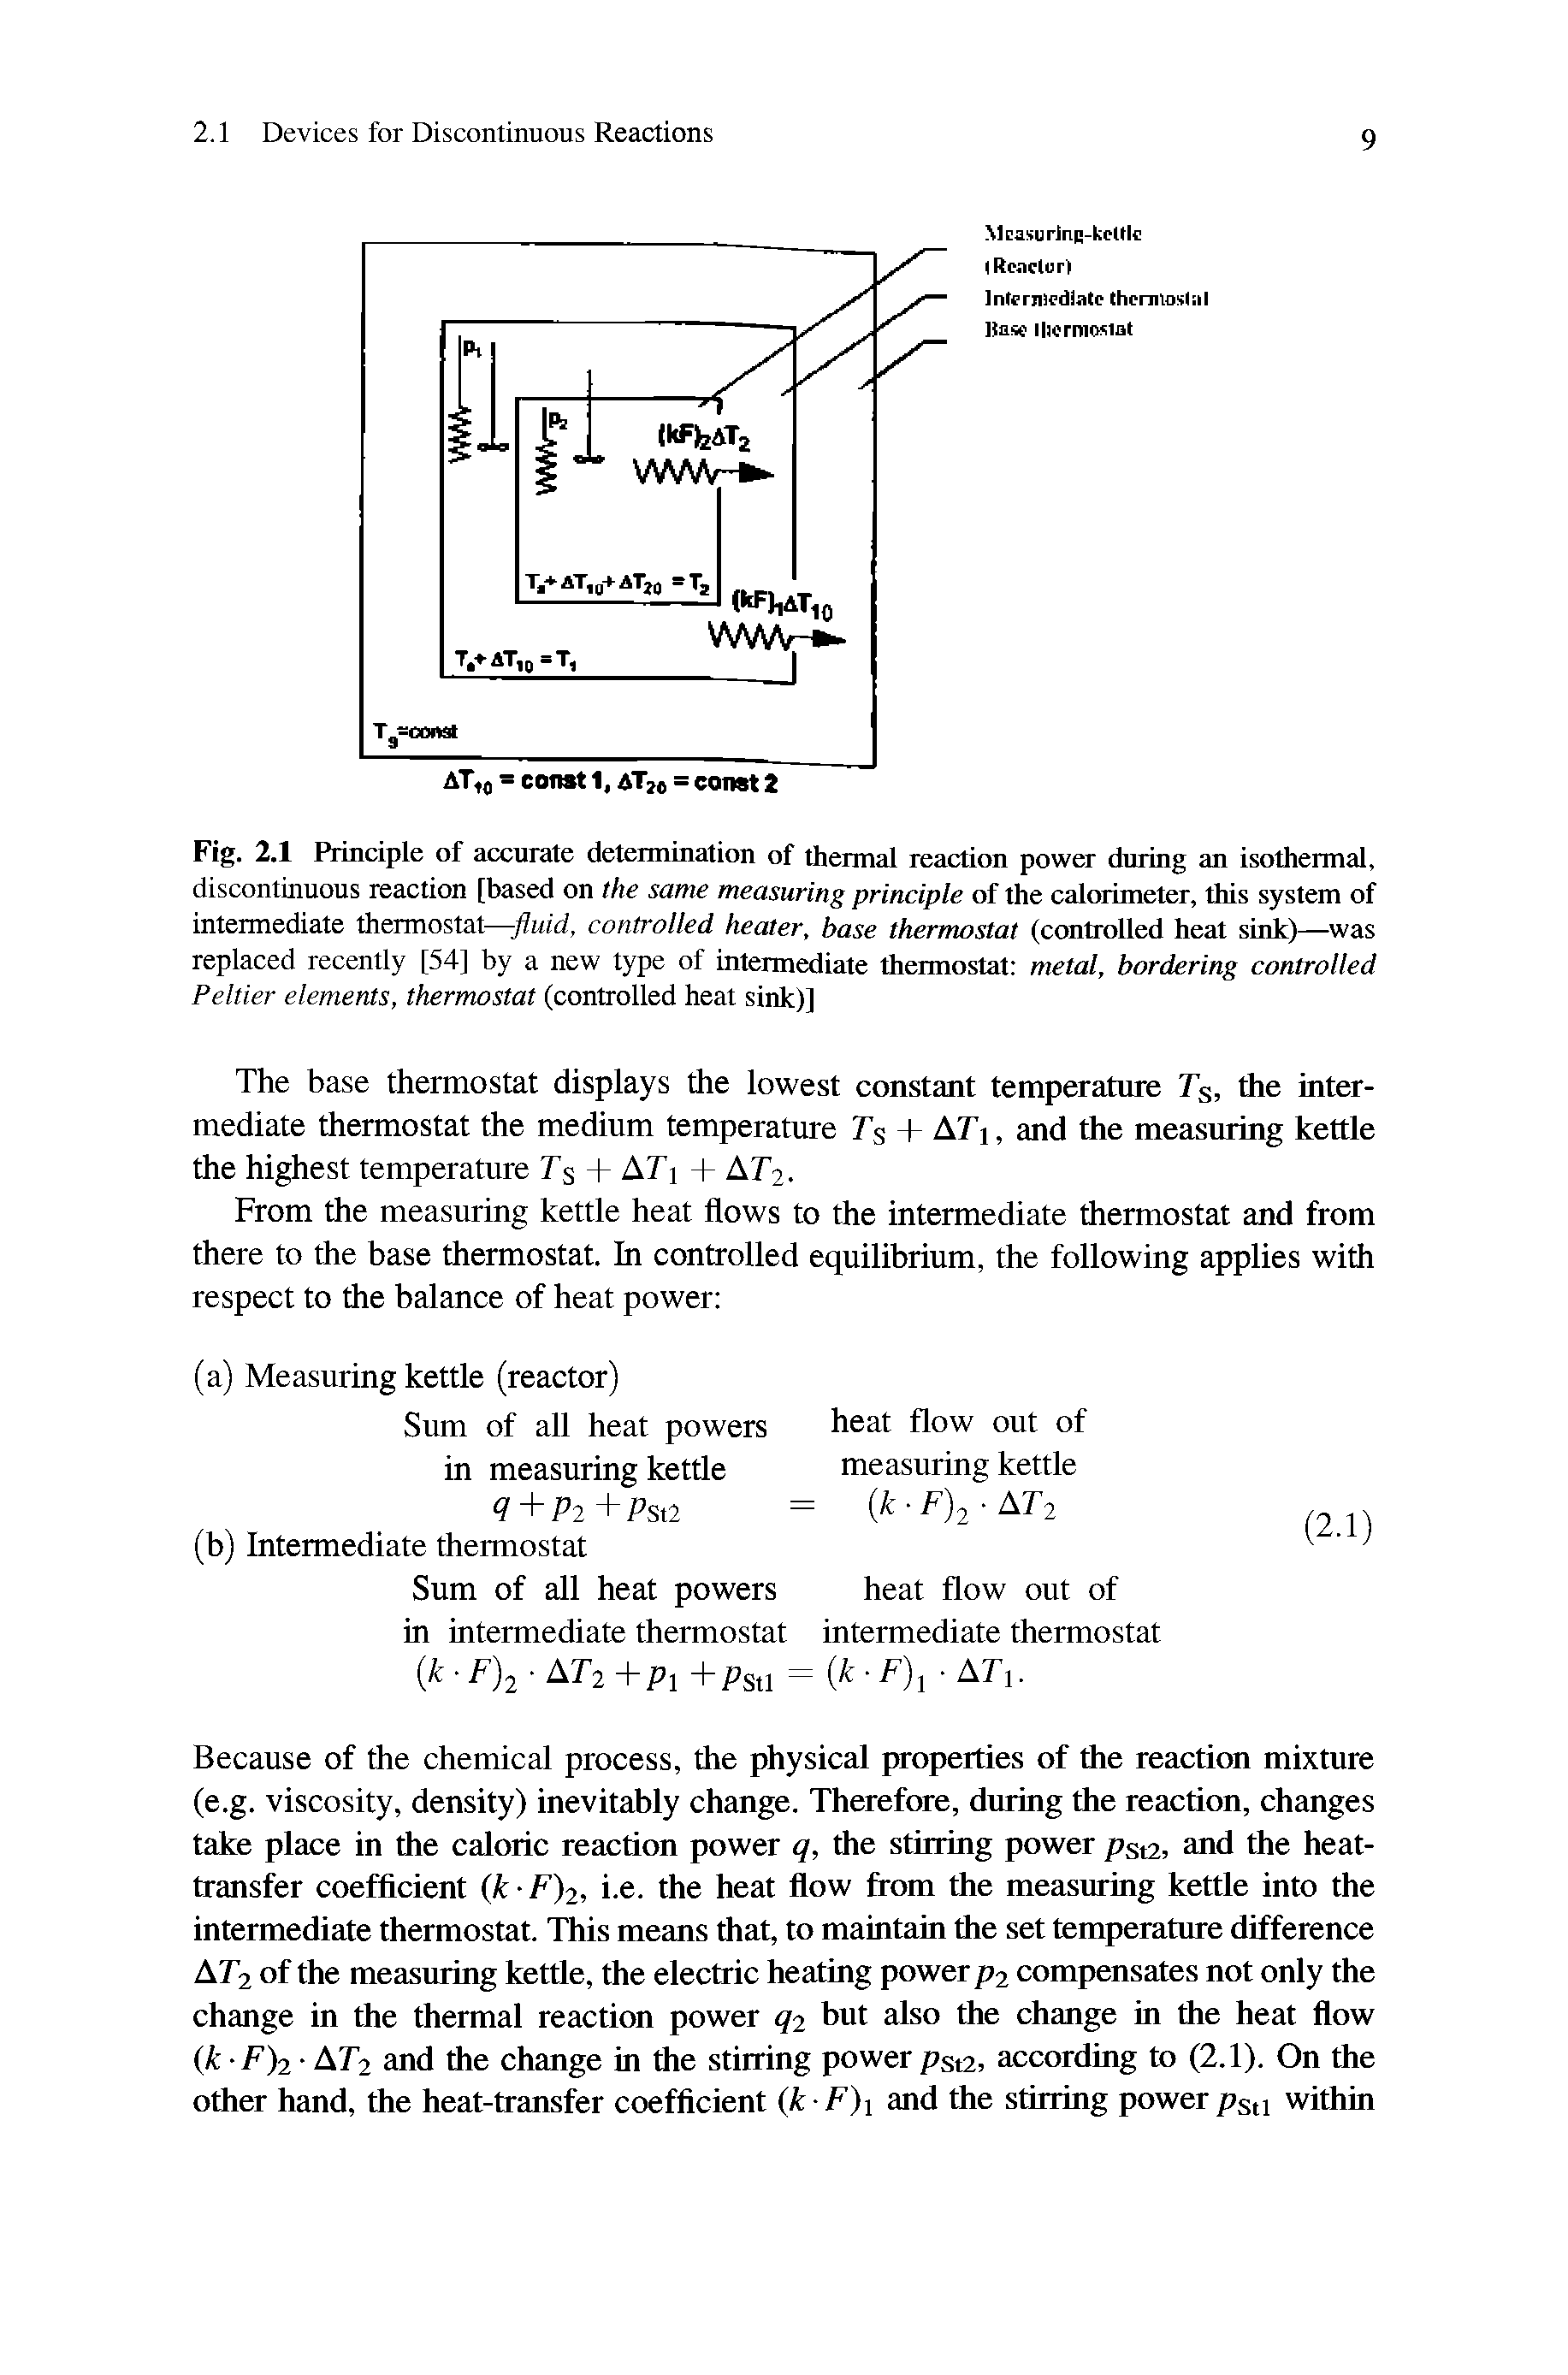 Fig. 2.1 Principle of accurate determination of thermal reaction power during an isothermal, discontinuous reaction [based on the same measuring principle of the calorimeter, this system of intermediate thermostat—controlled heater, base thermostat (controlled heat sink)—was replaced recently [54] by a new type of intermediate thermostat metal, bordering controlled Peltier elements, thermostat (controlled heat sink)]...